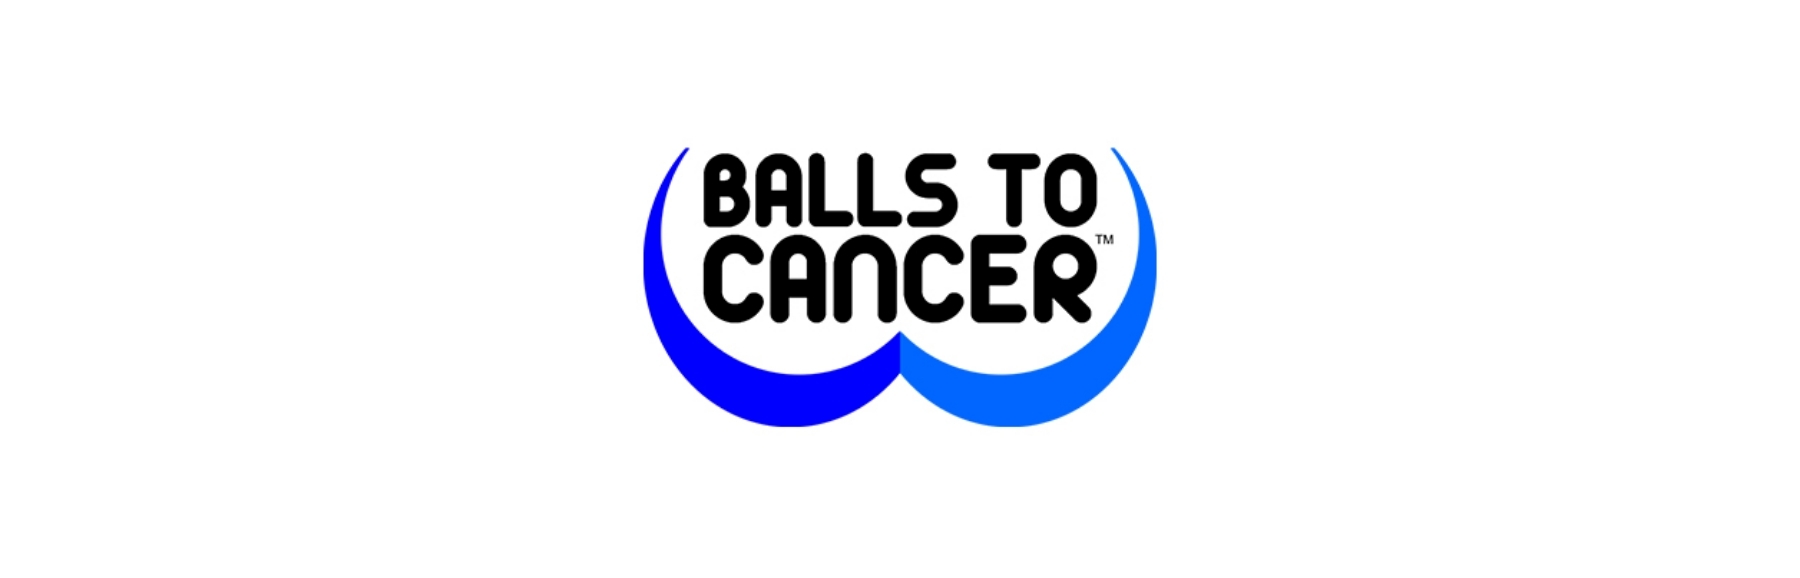 BALLS TO CANCER